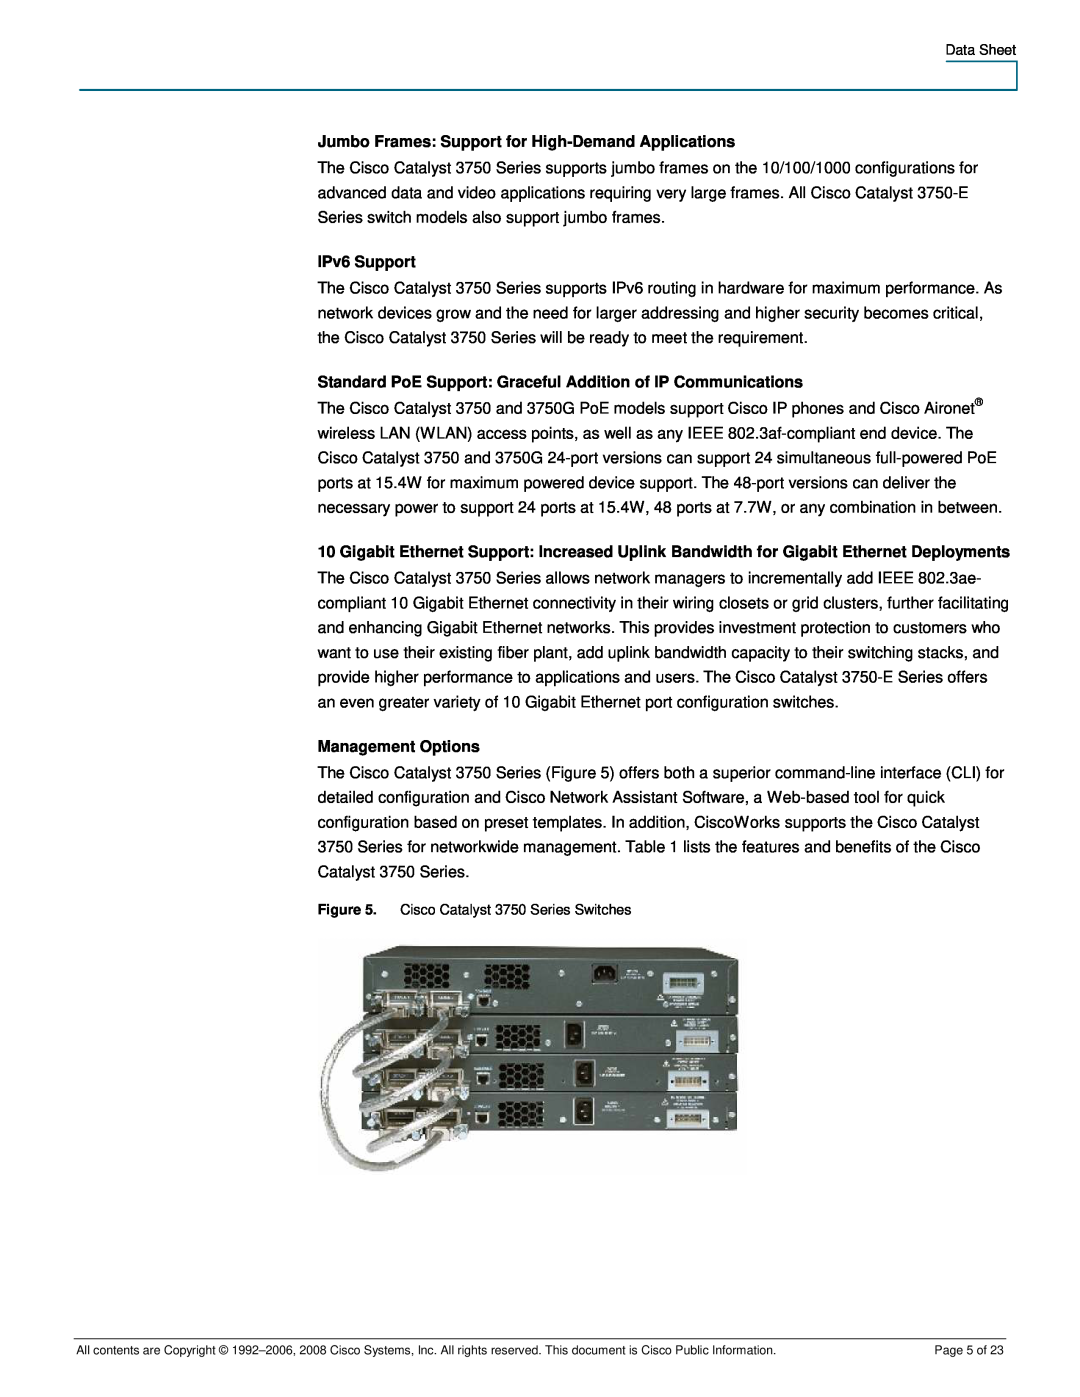 Cisco Systems 3750-48PS Jumbo Frames Support for High-Demand Applications, IPv6 Support, Management Options, Page 5 of 